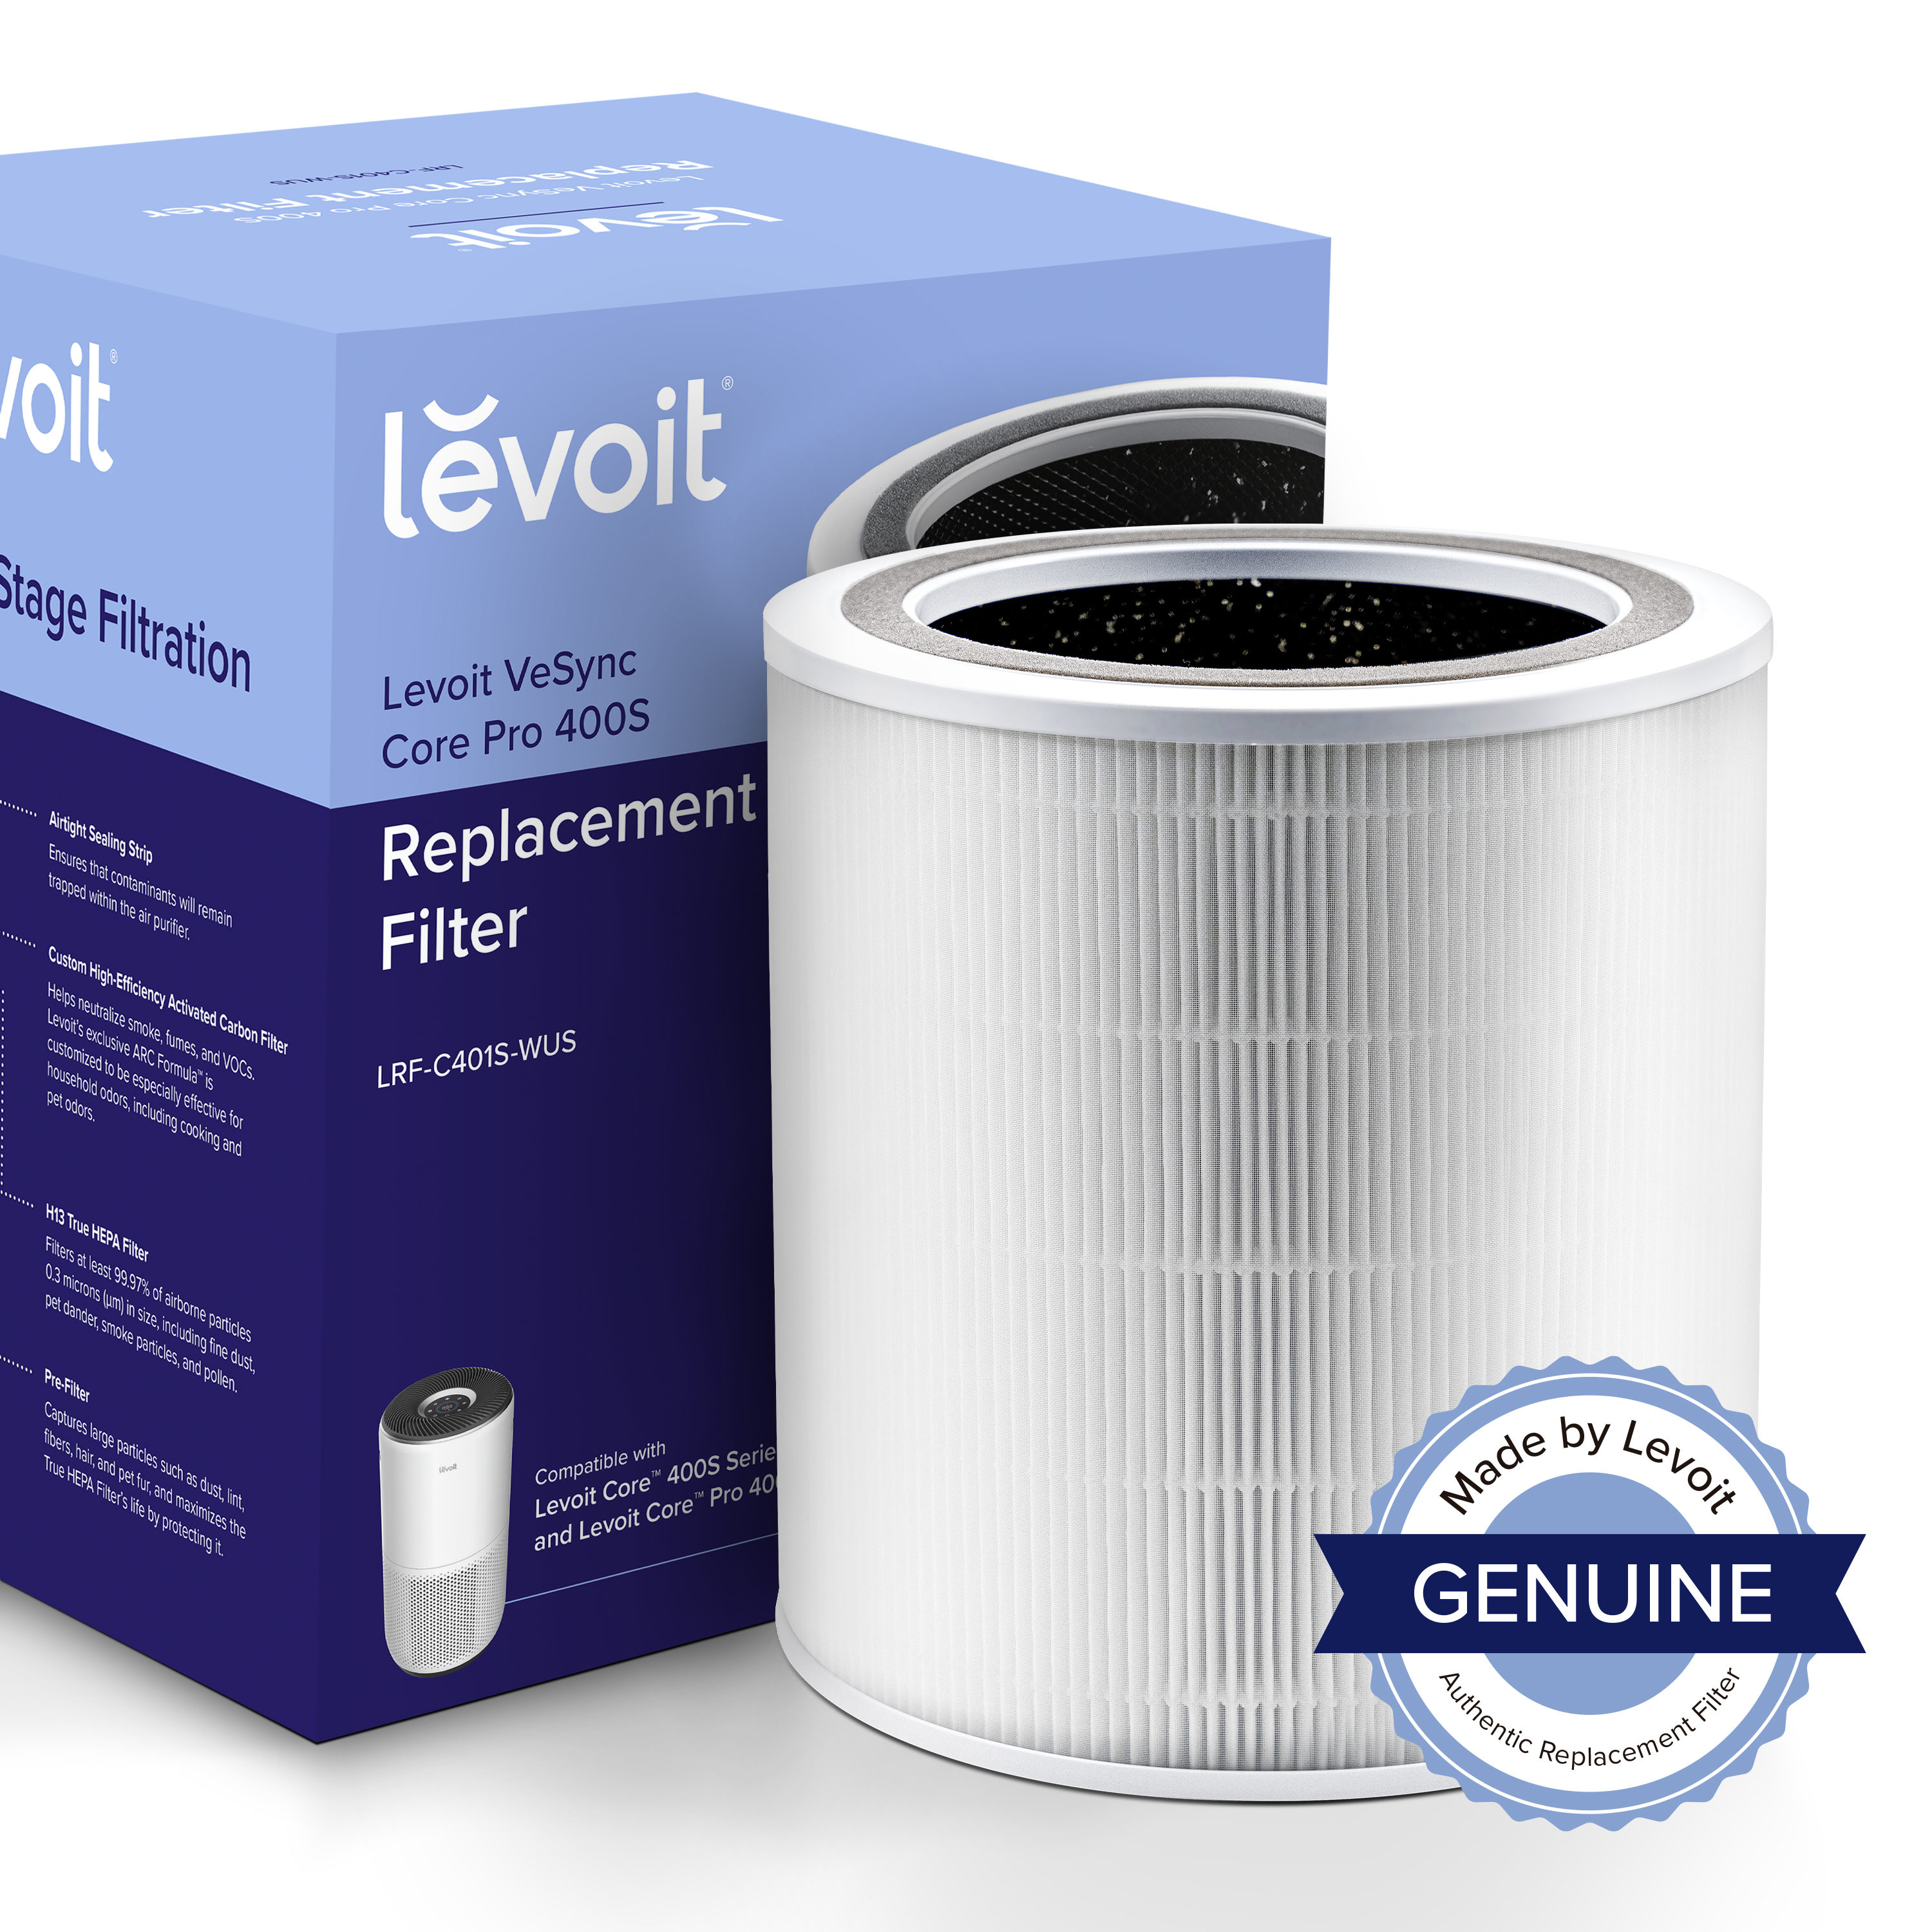 Levoit Air Purifier for Sale in Greenbelt, MD - OfferUp